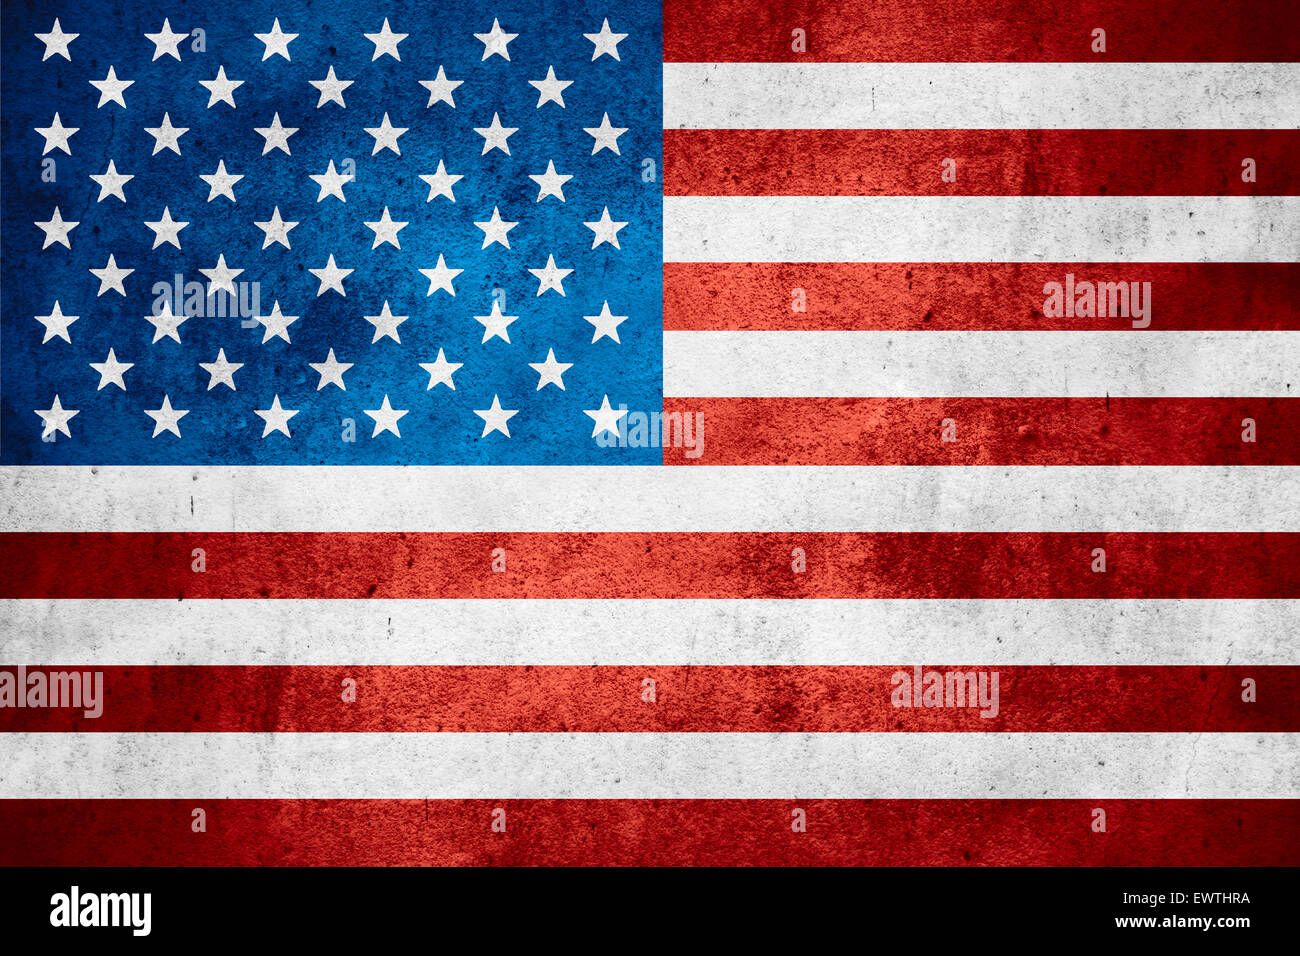 United States of America flag or American banner on rough pattern texture background Stock Photo